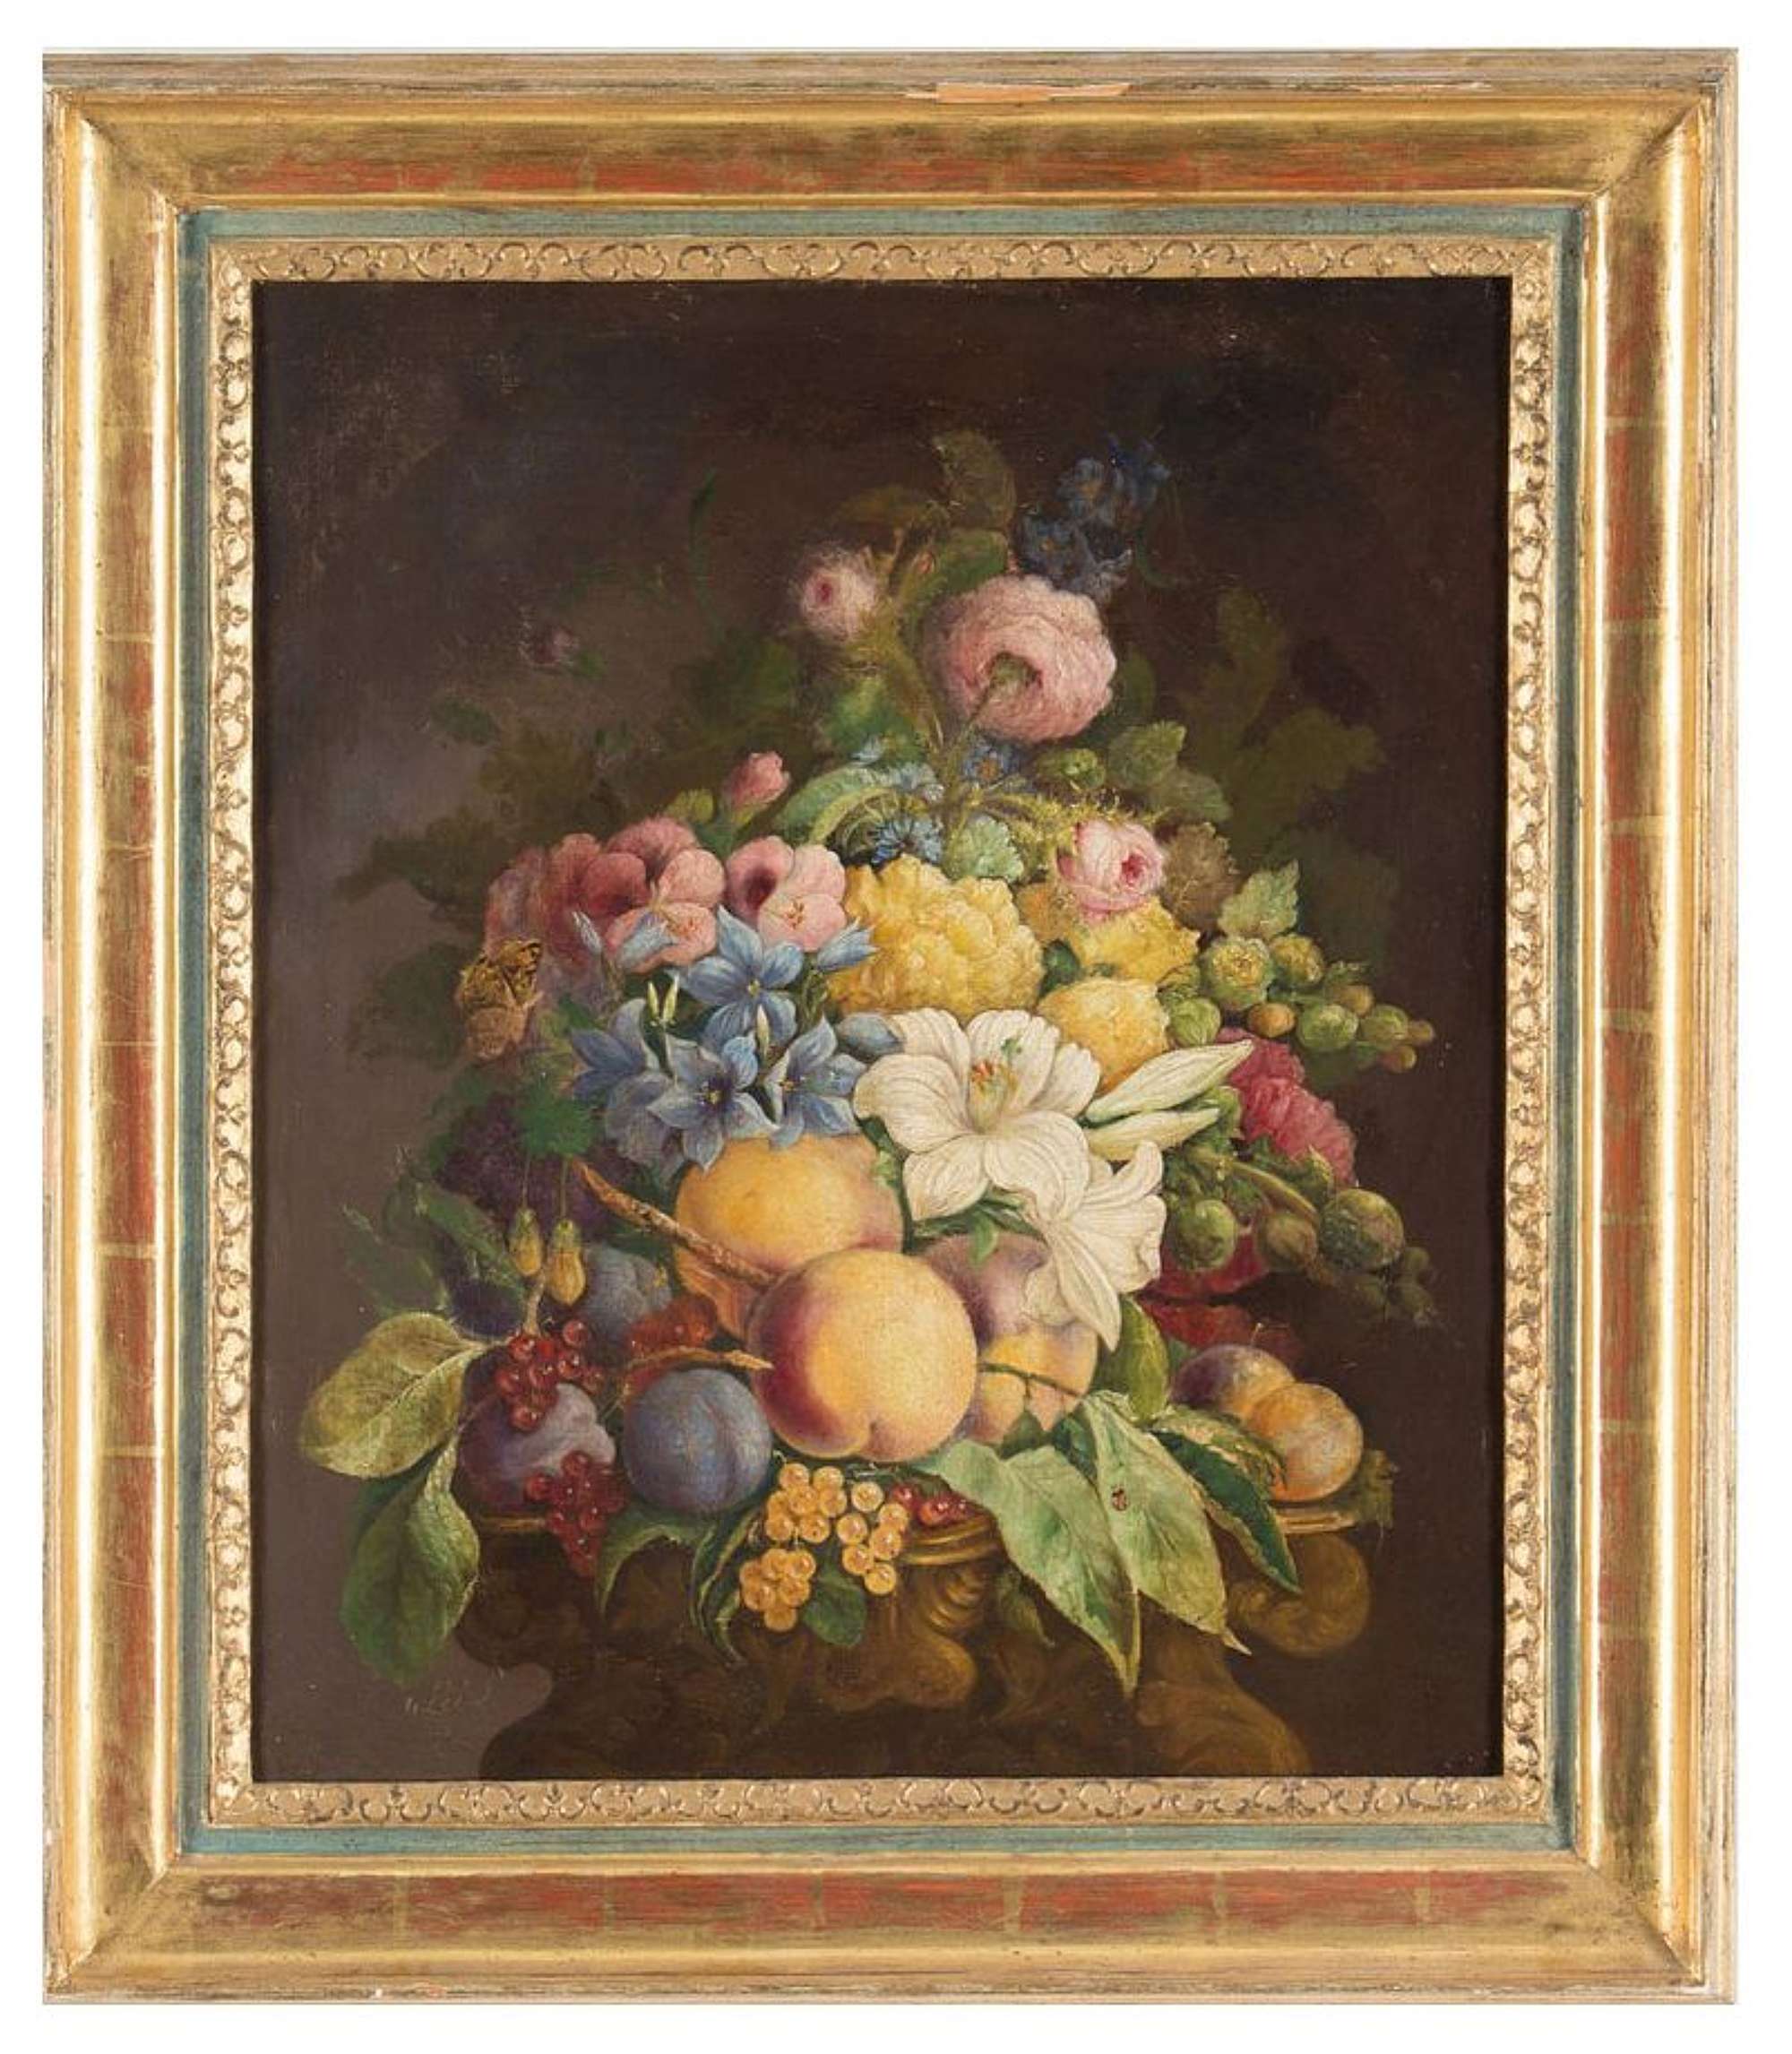 Still Life Bouquet of Flowers, 19th-Century, Oil on Canvas, Framed